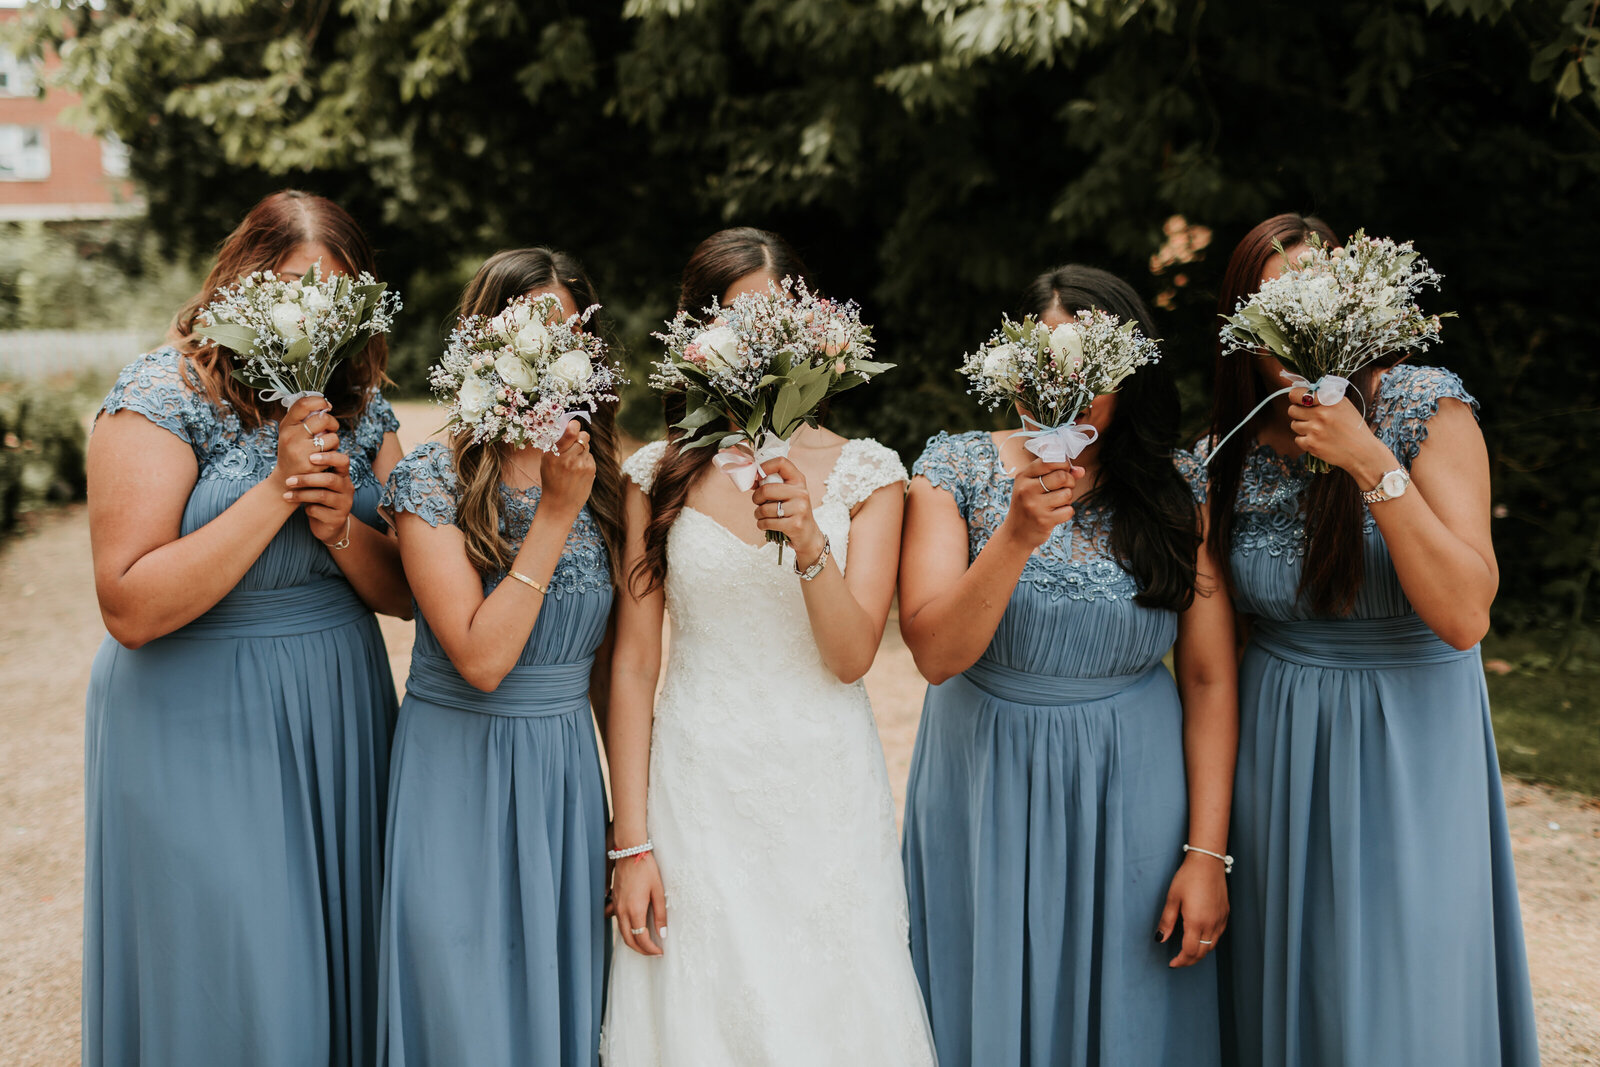 Bridesmaids with flowers up covering faces